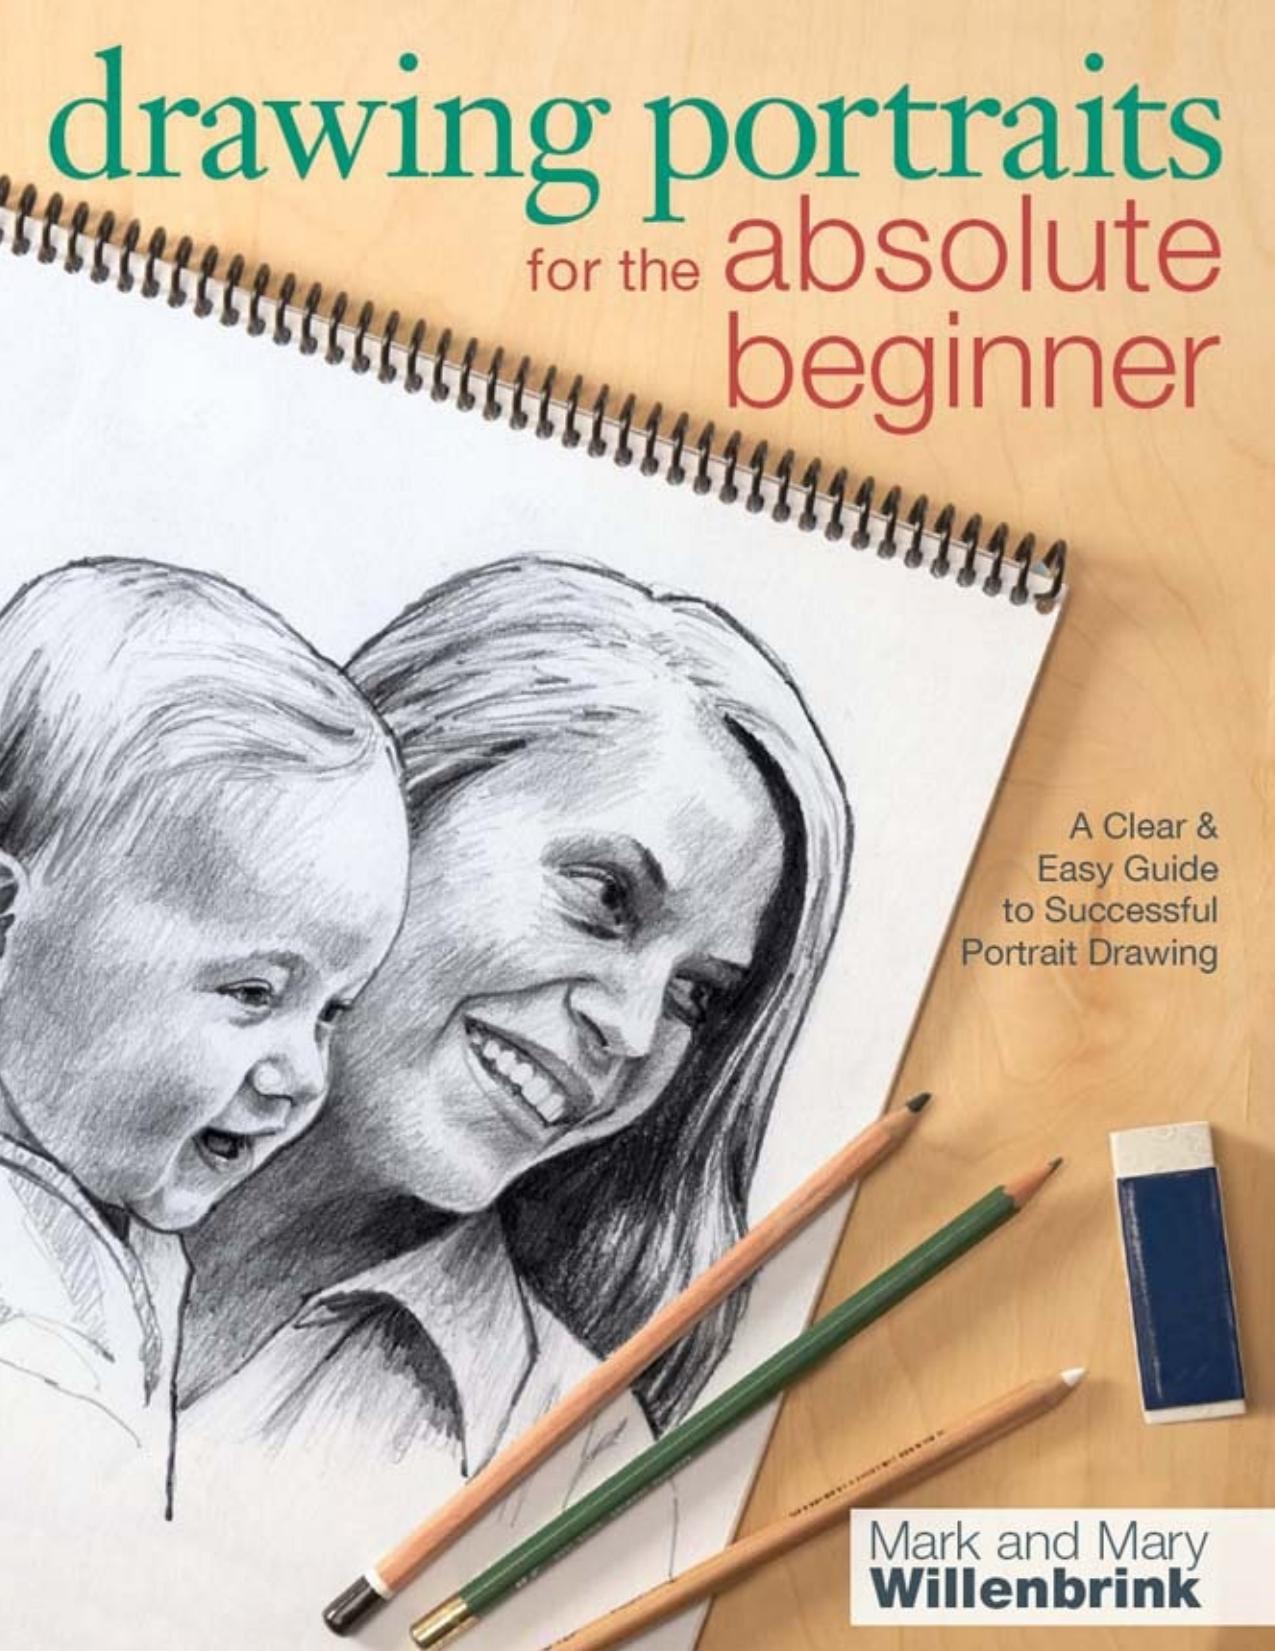 Drawing Portraits for the Absolute Beginner : a Clear and Easy Guide to Successful Portrait Drawing - PDFDrive.com